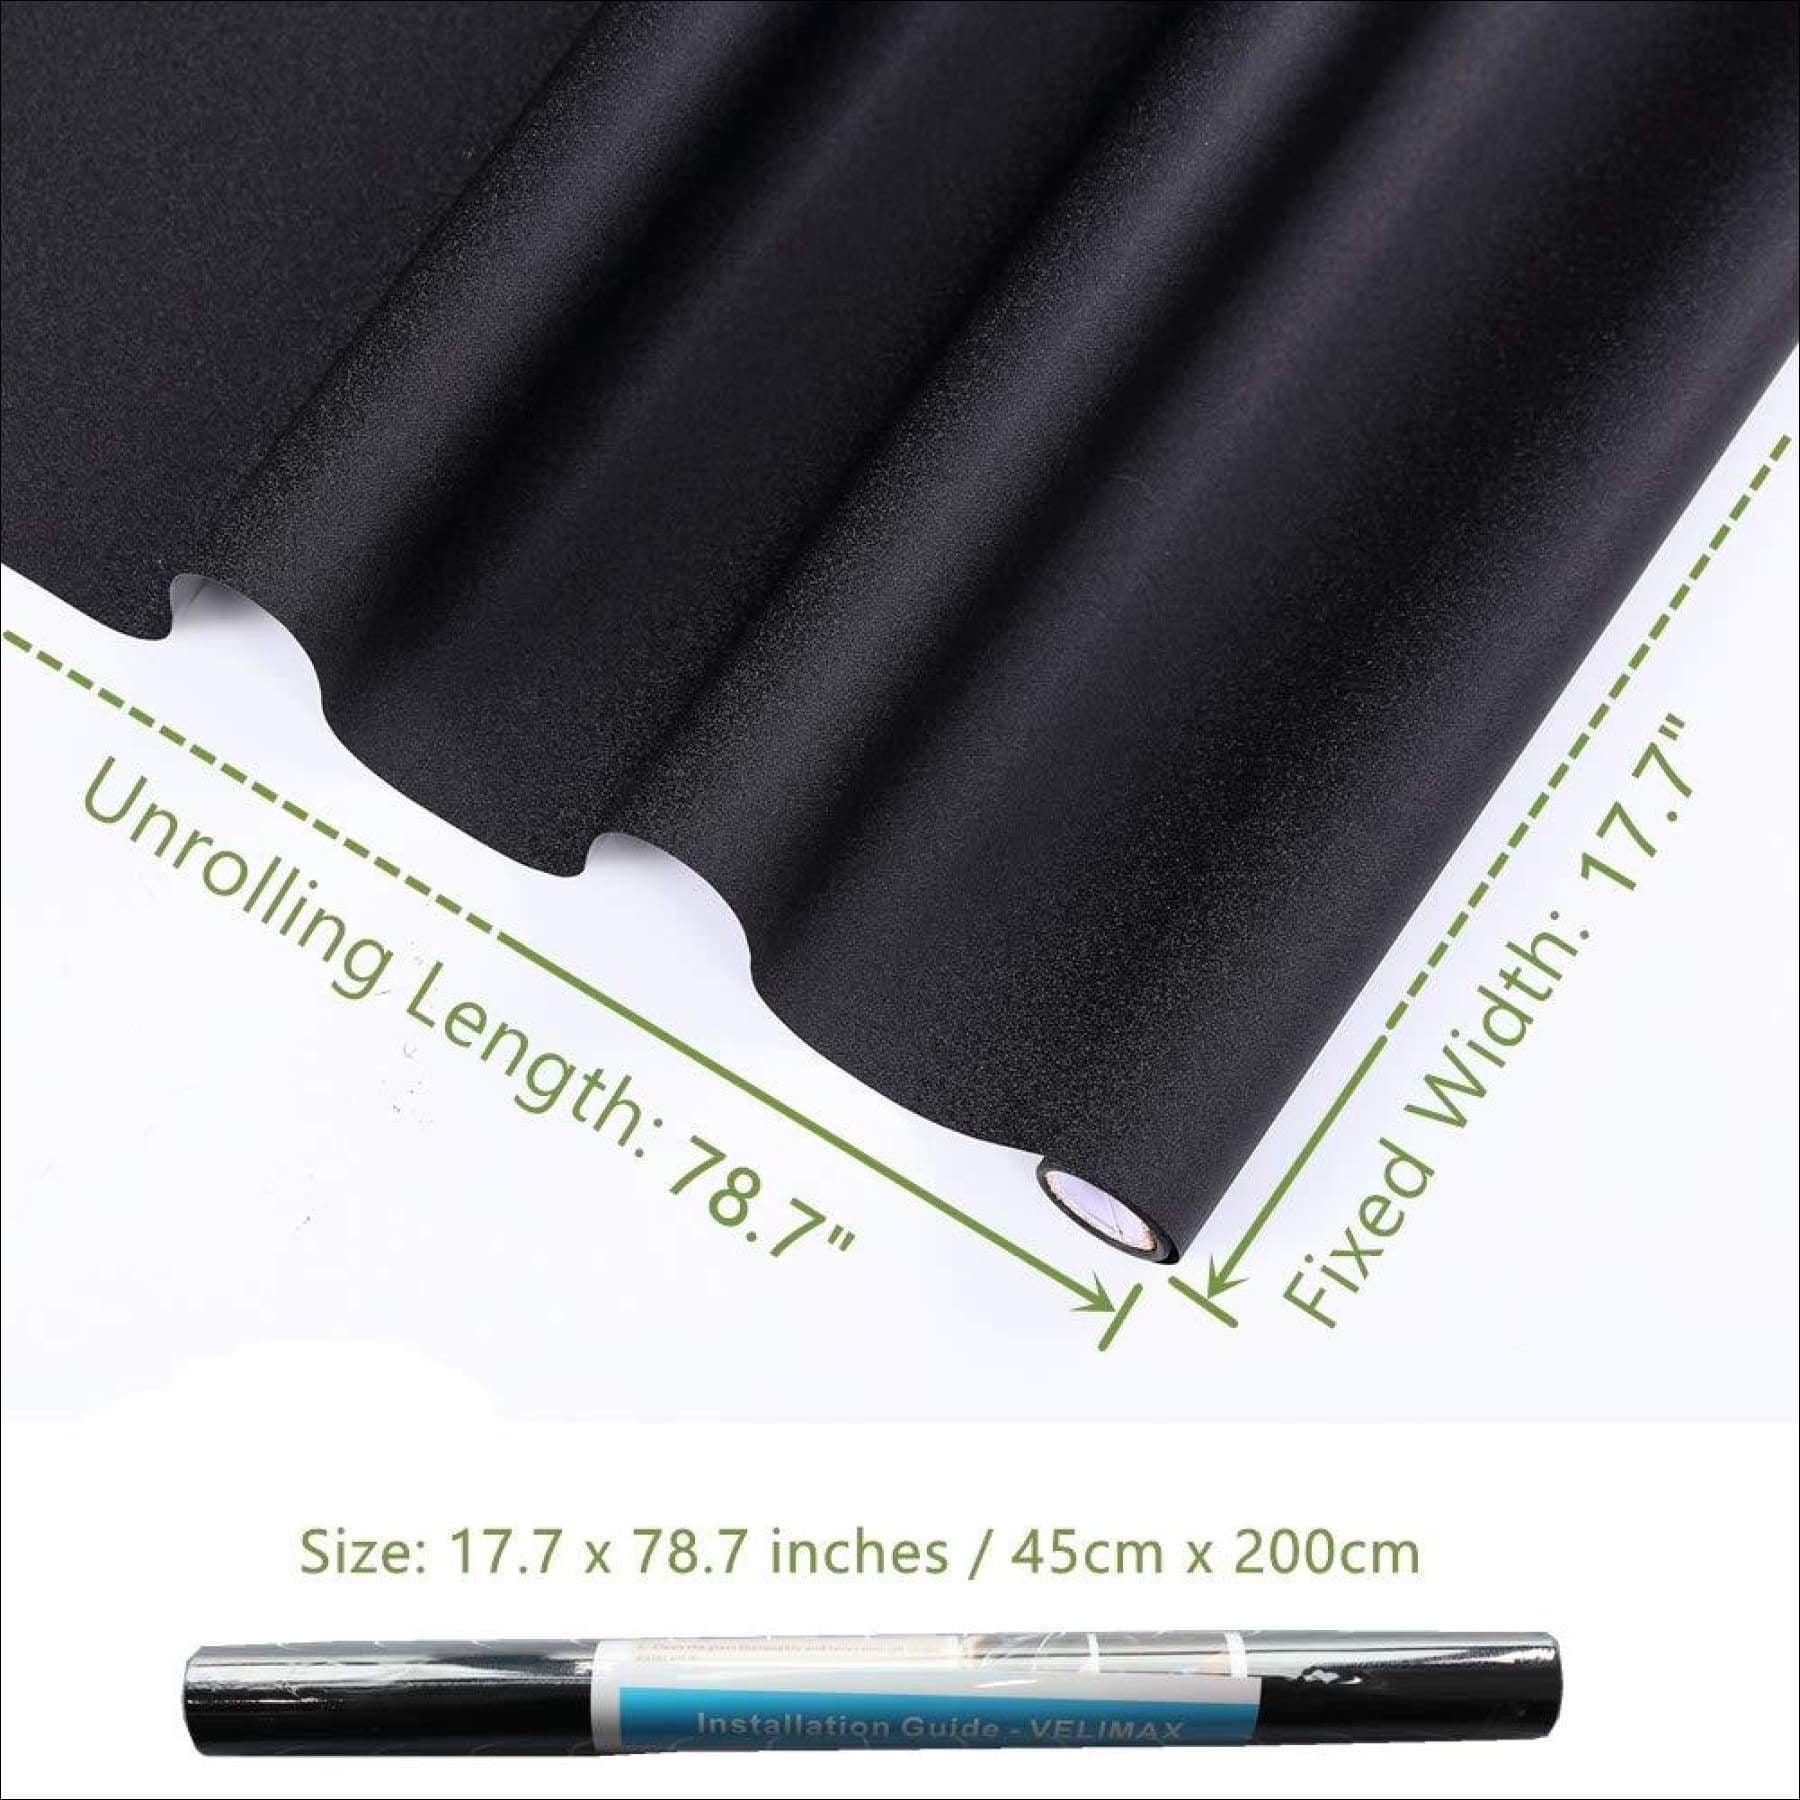 Window Film Black Tint Cover Static Cling Total Blackout Privacy 17.7 x 78.7 in. 